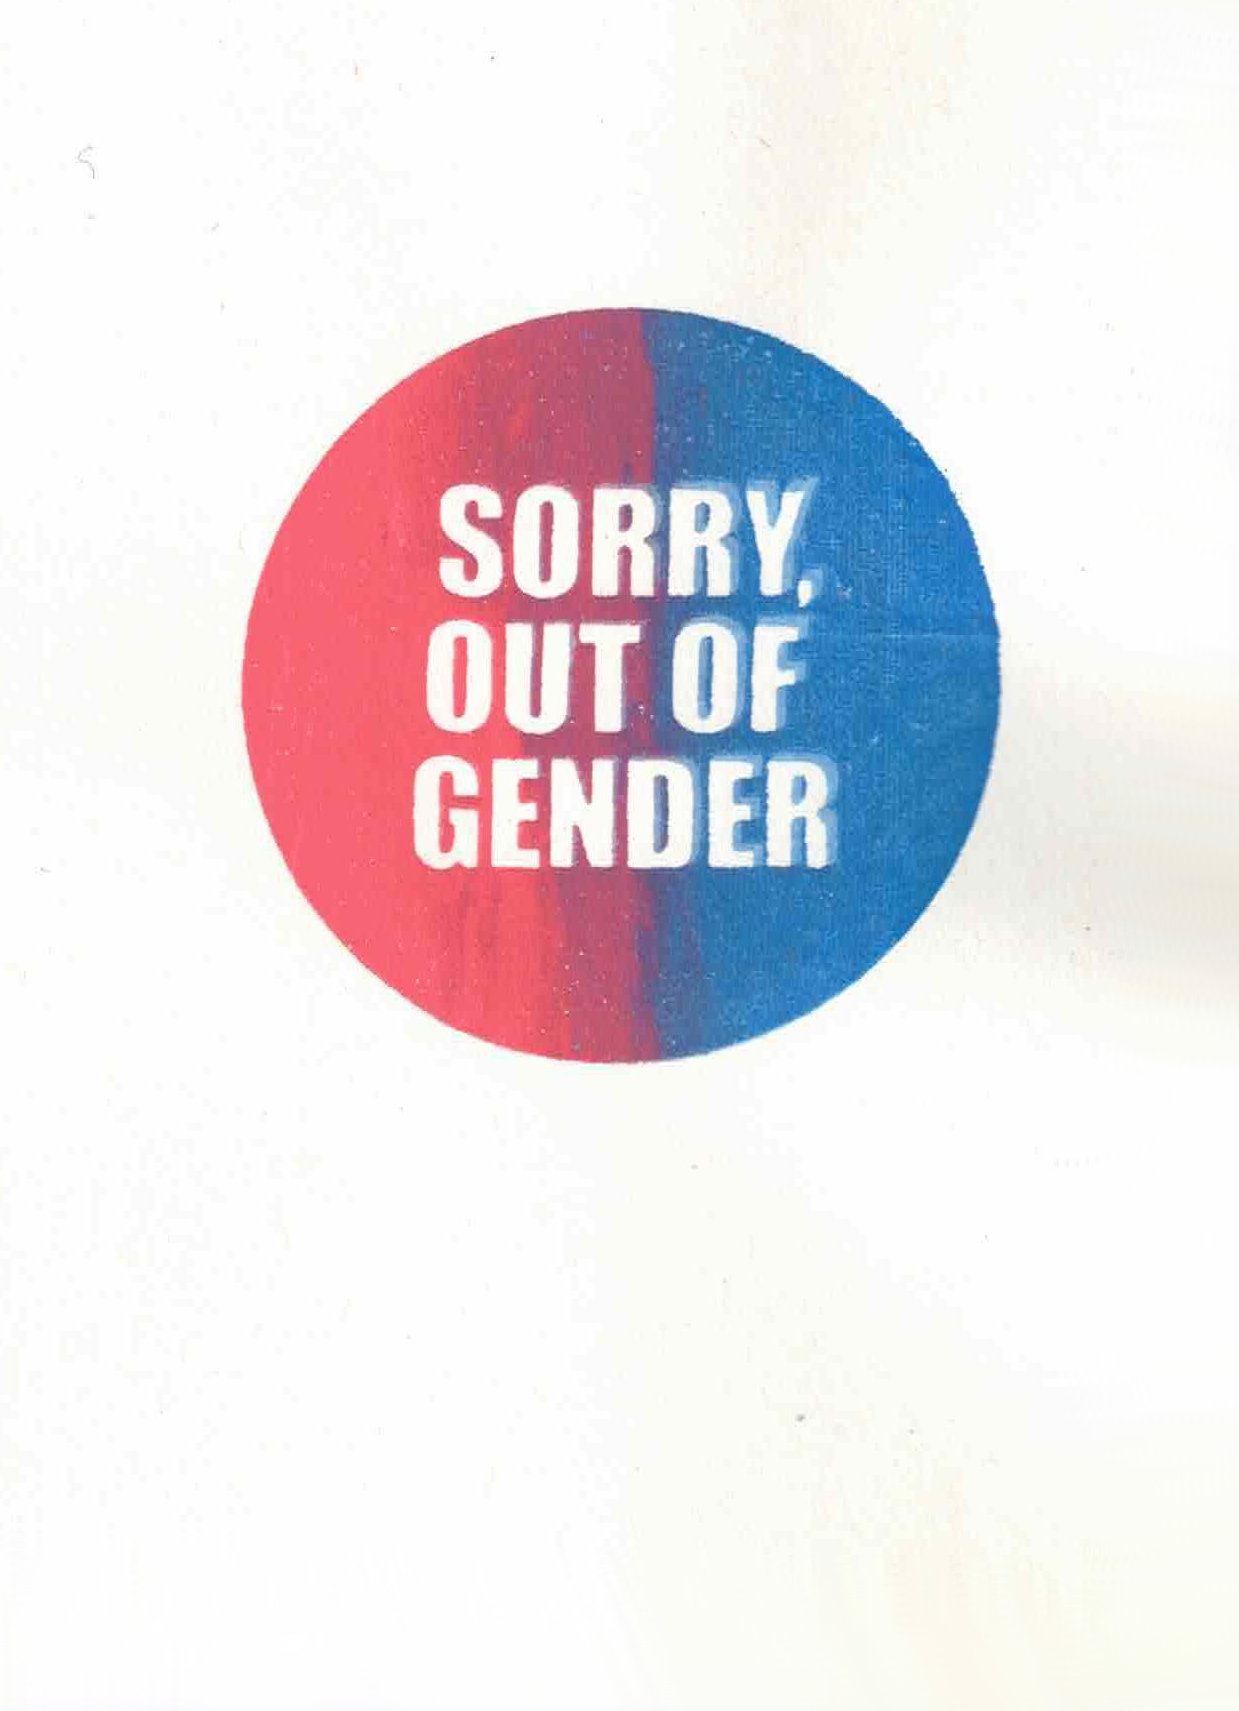 Sorry, out of gender